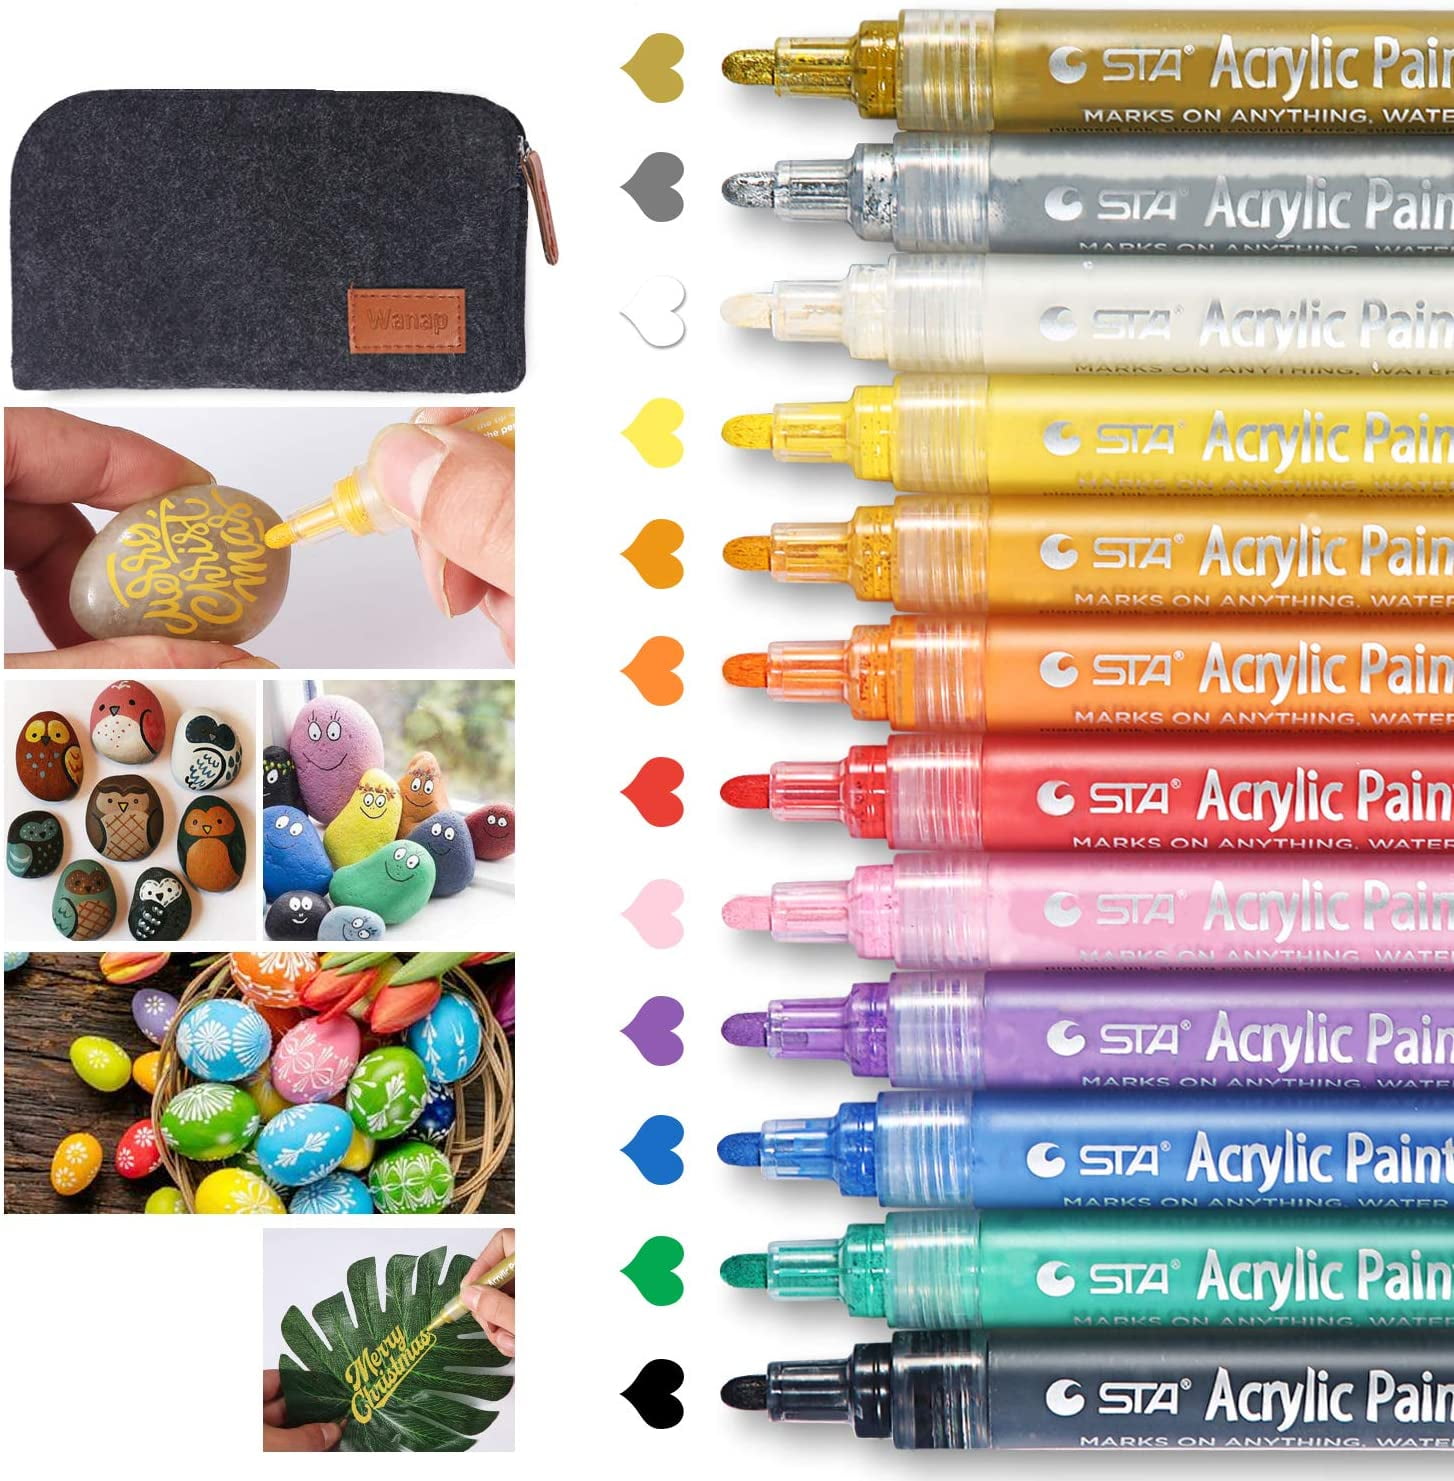 Paint Pens Paint Markers, 12 Colors Acrylic Paint Pens Medium Tip for Rocks  Painting, Fabric, Wood, Canvas, Ceramic, Scrapbooking, DIY Crafts Making